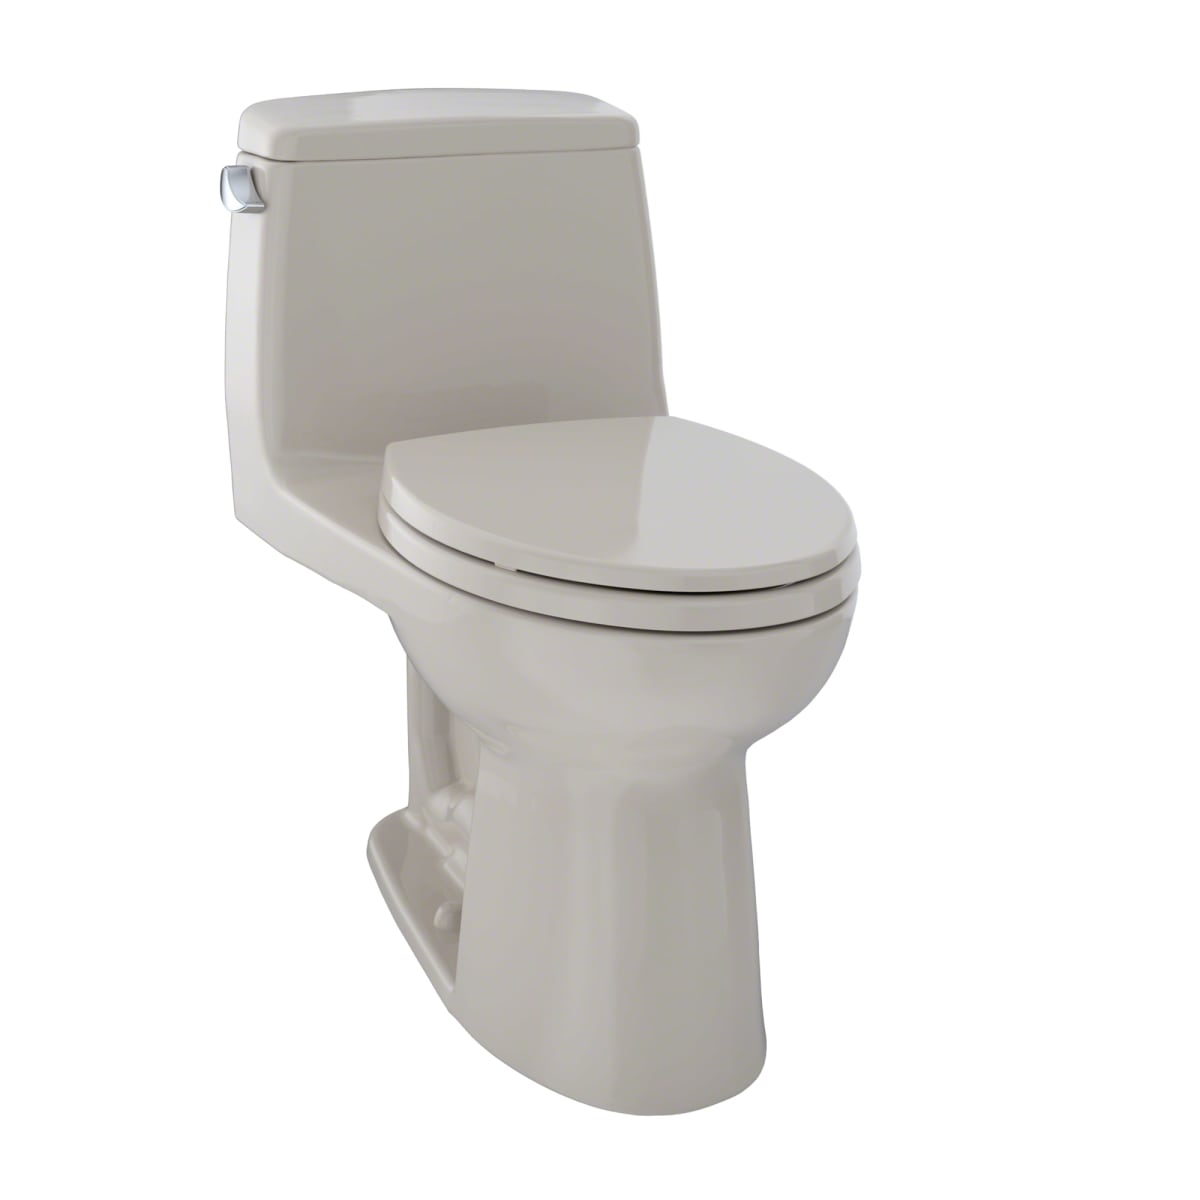 TOTO MS854114EL ECO ULTRAMAX ONE PIECE ELONGATED 1.28 GPF TOILET WITH E-MAX FLUSH SYSTEM - SOFTCLOSE SEAT INCLUDED